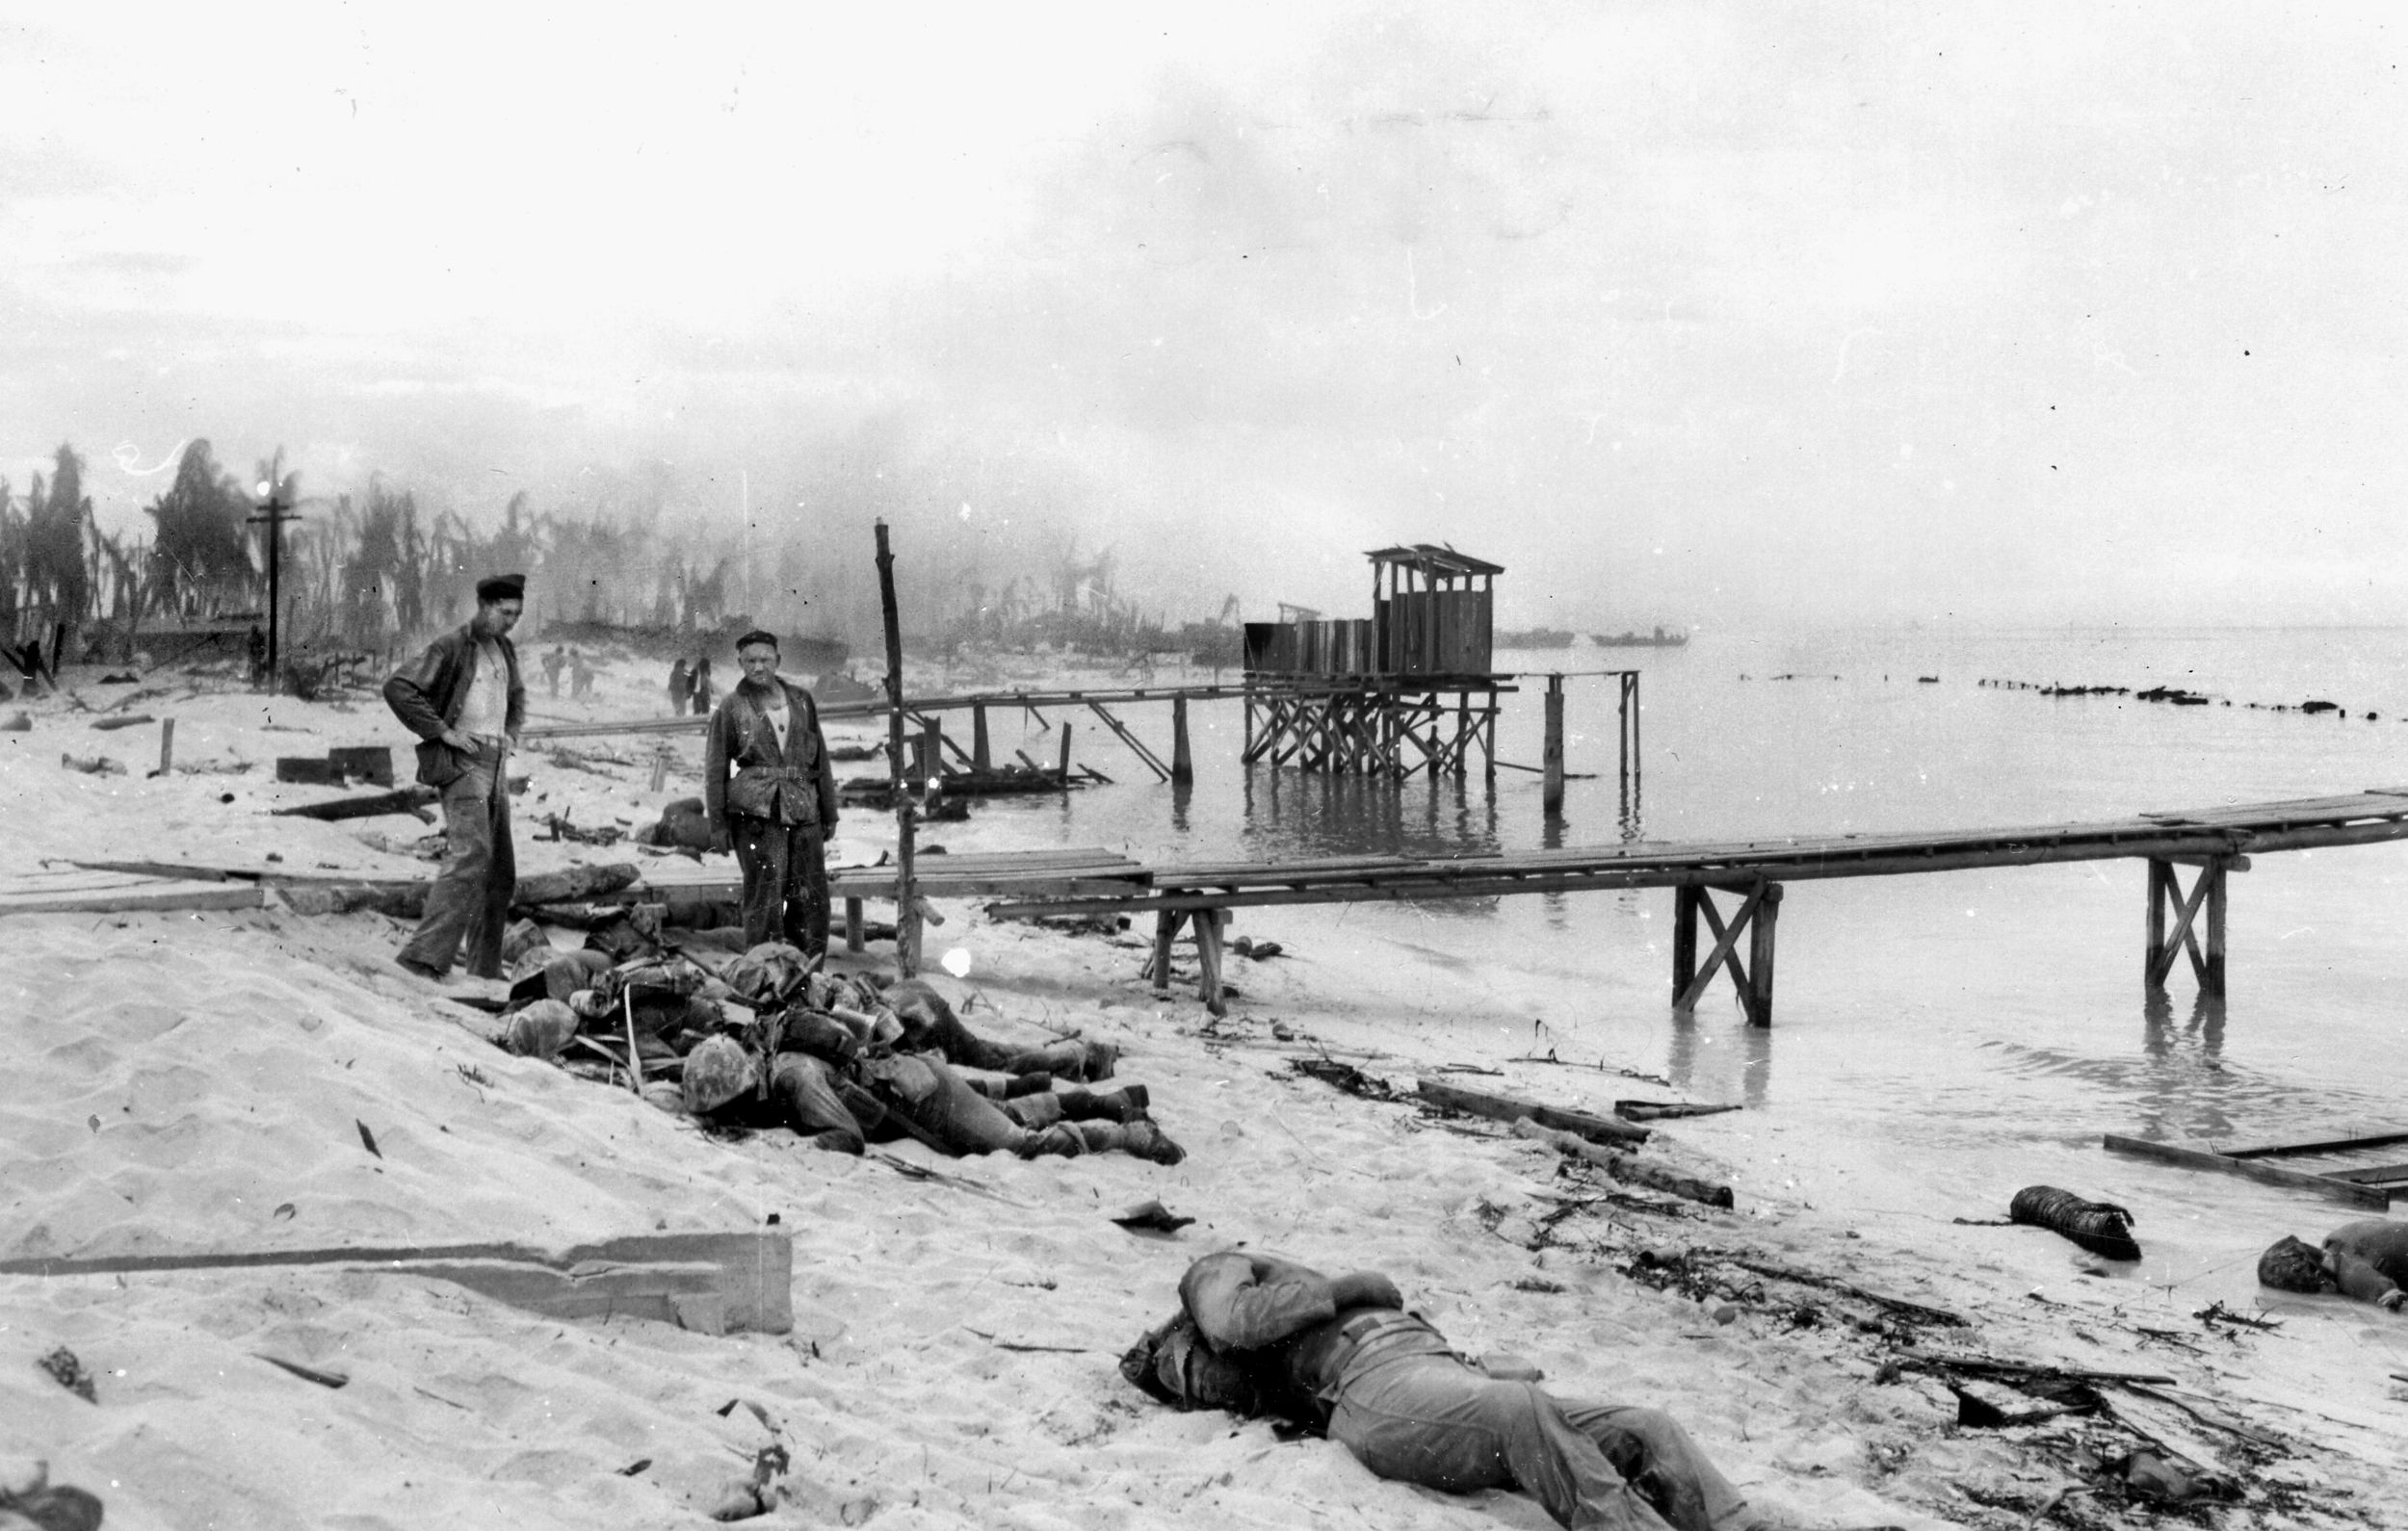 Two Marines view the carnage on the beach, where scores of Americans died even before they could fire a shot at the enemy. The taking of Tarawa resulted in one of the highest casualty tolls in the Corps’ history. 